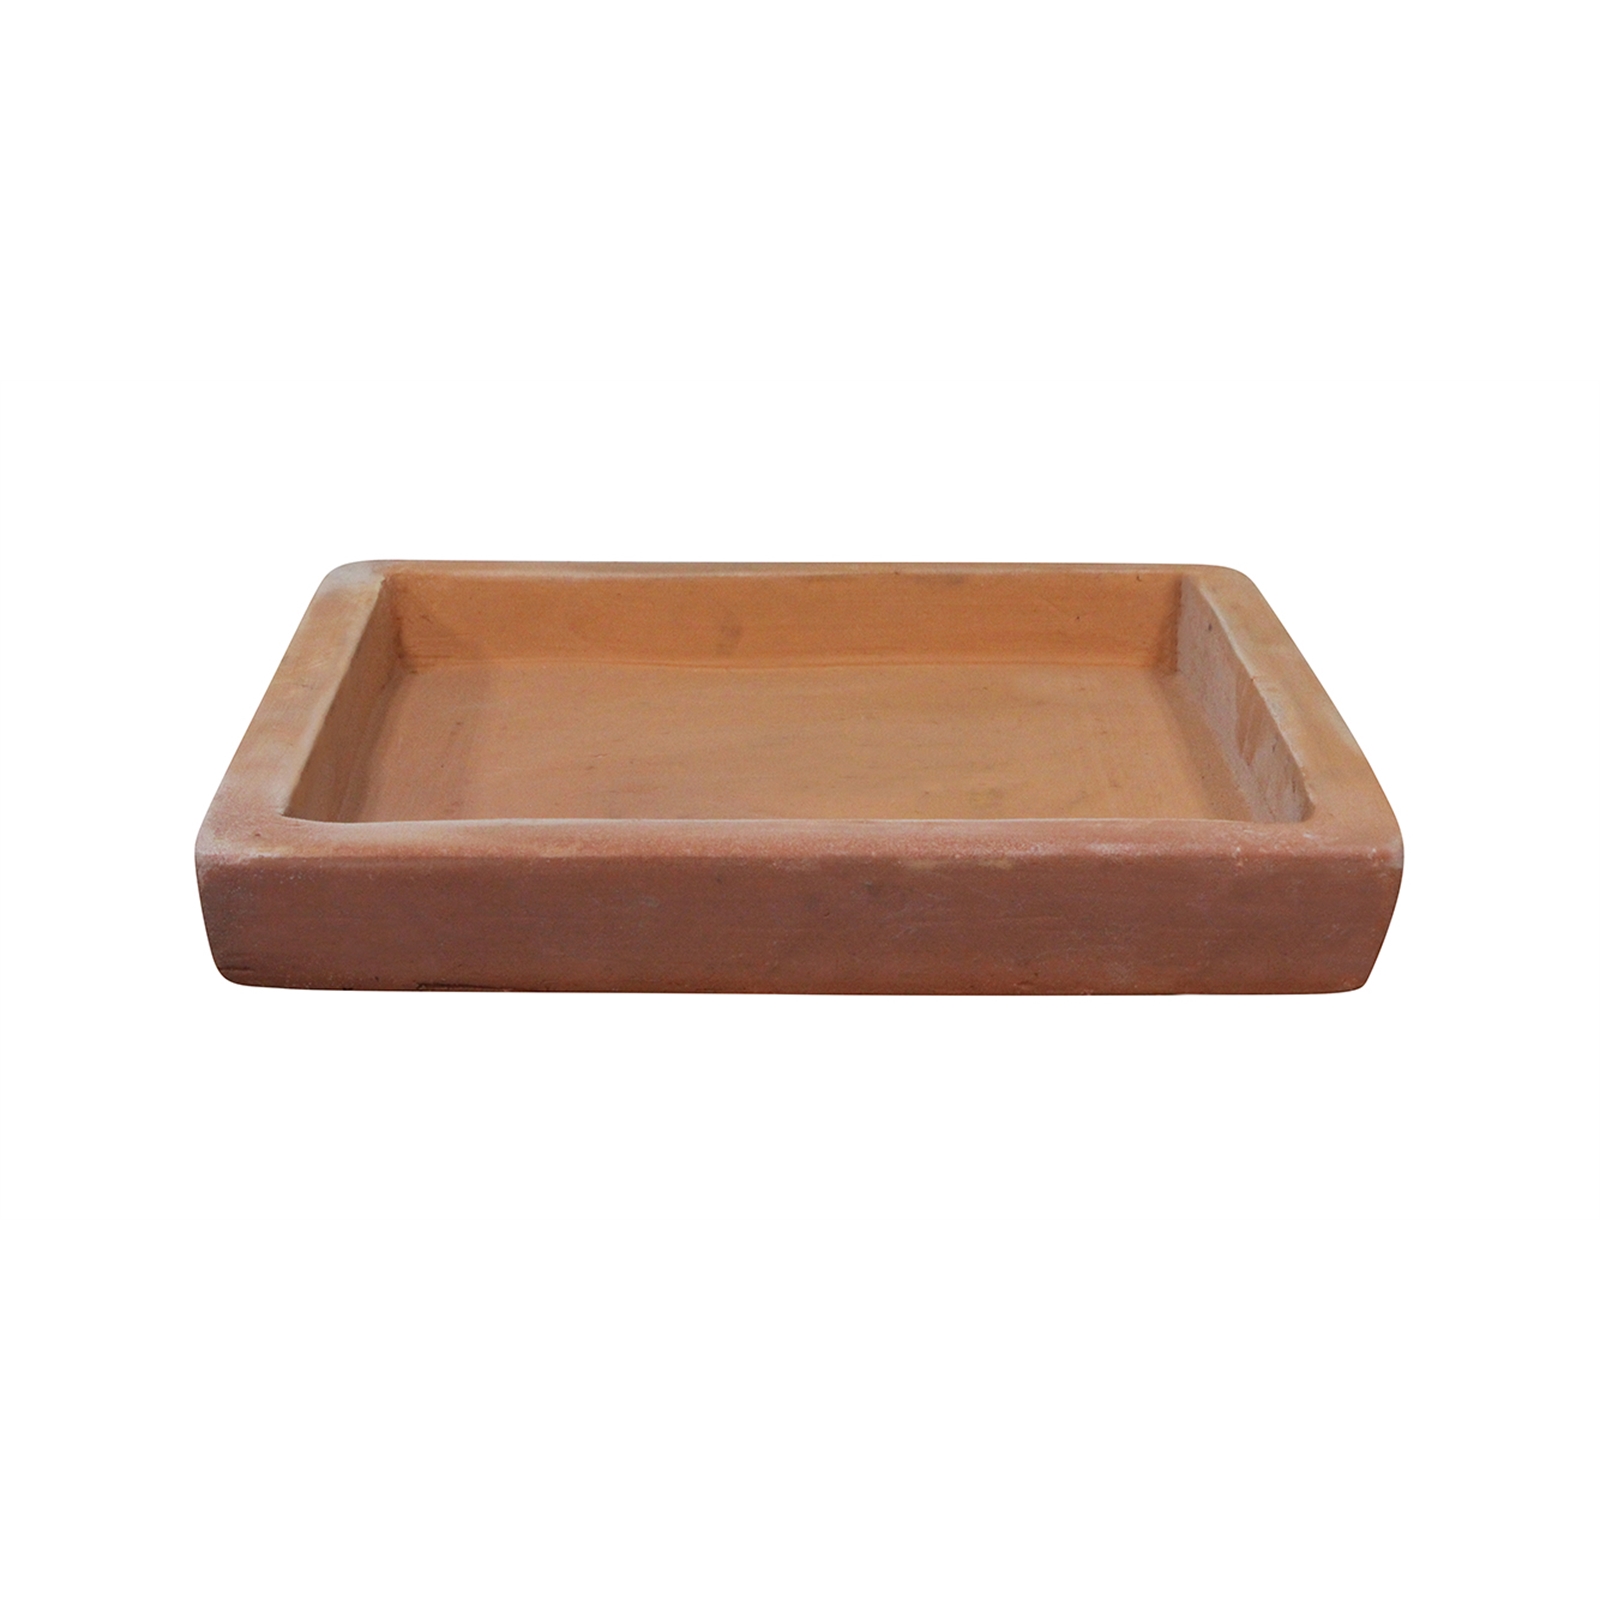 Northcote Pottery 40cm Terracotta CottaSEAL Square Saucer